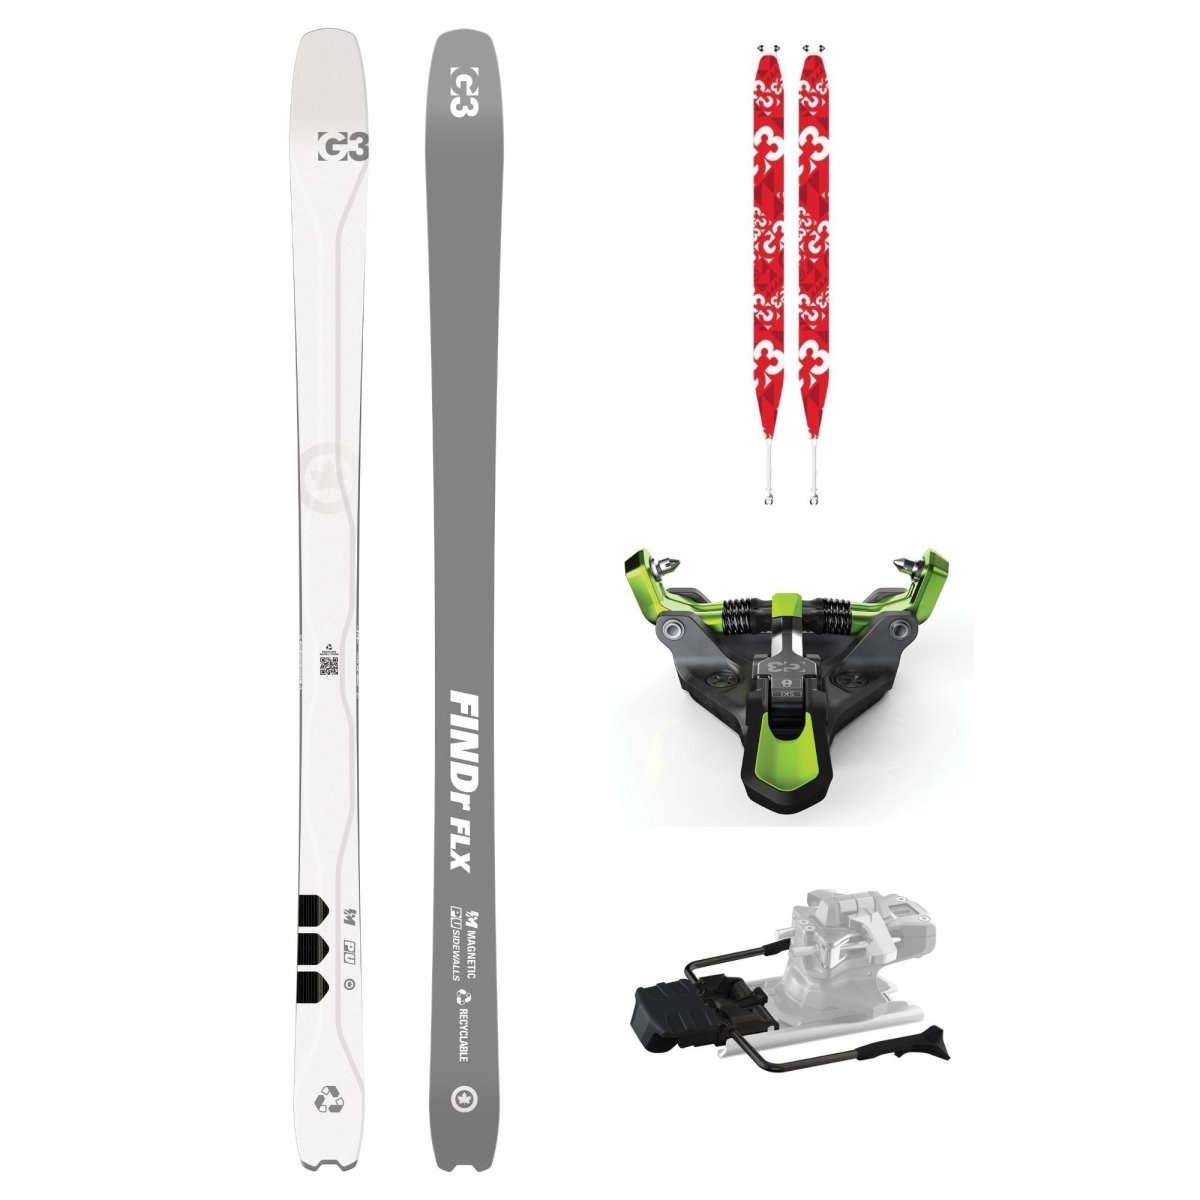 FINDr FLX R3 94 Kit - Skis - G3 Store Canada